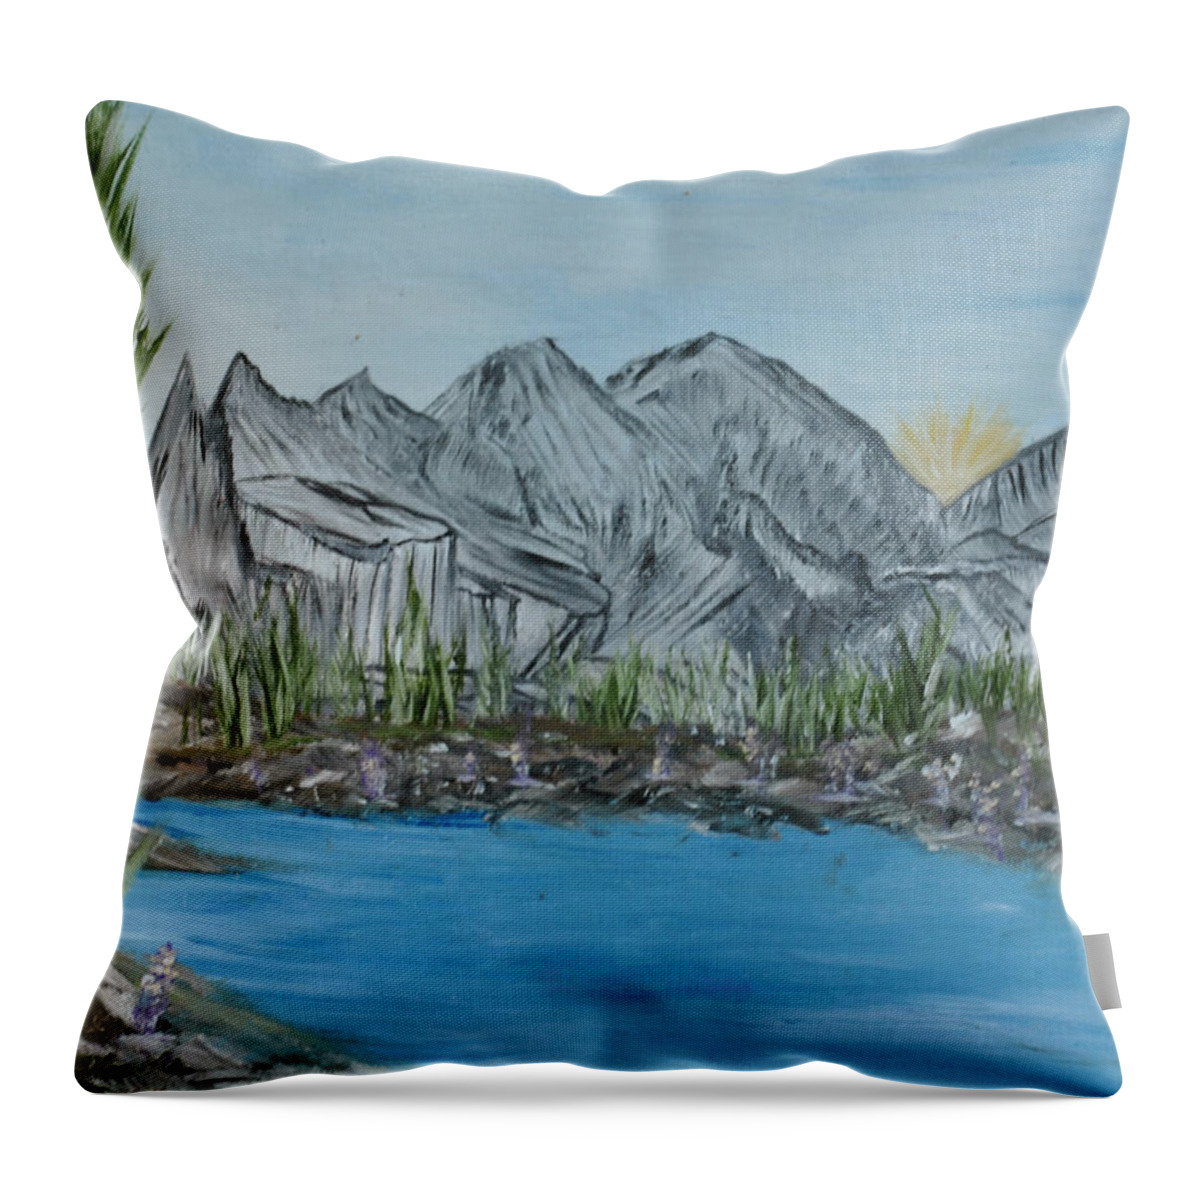  Throw Pillow featuring the painting Flathead Lake by Suzanne Surber